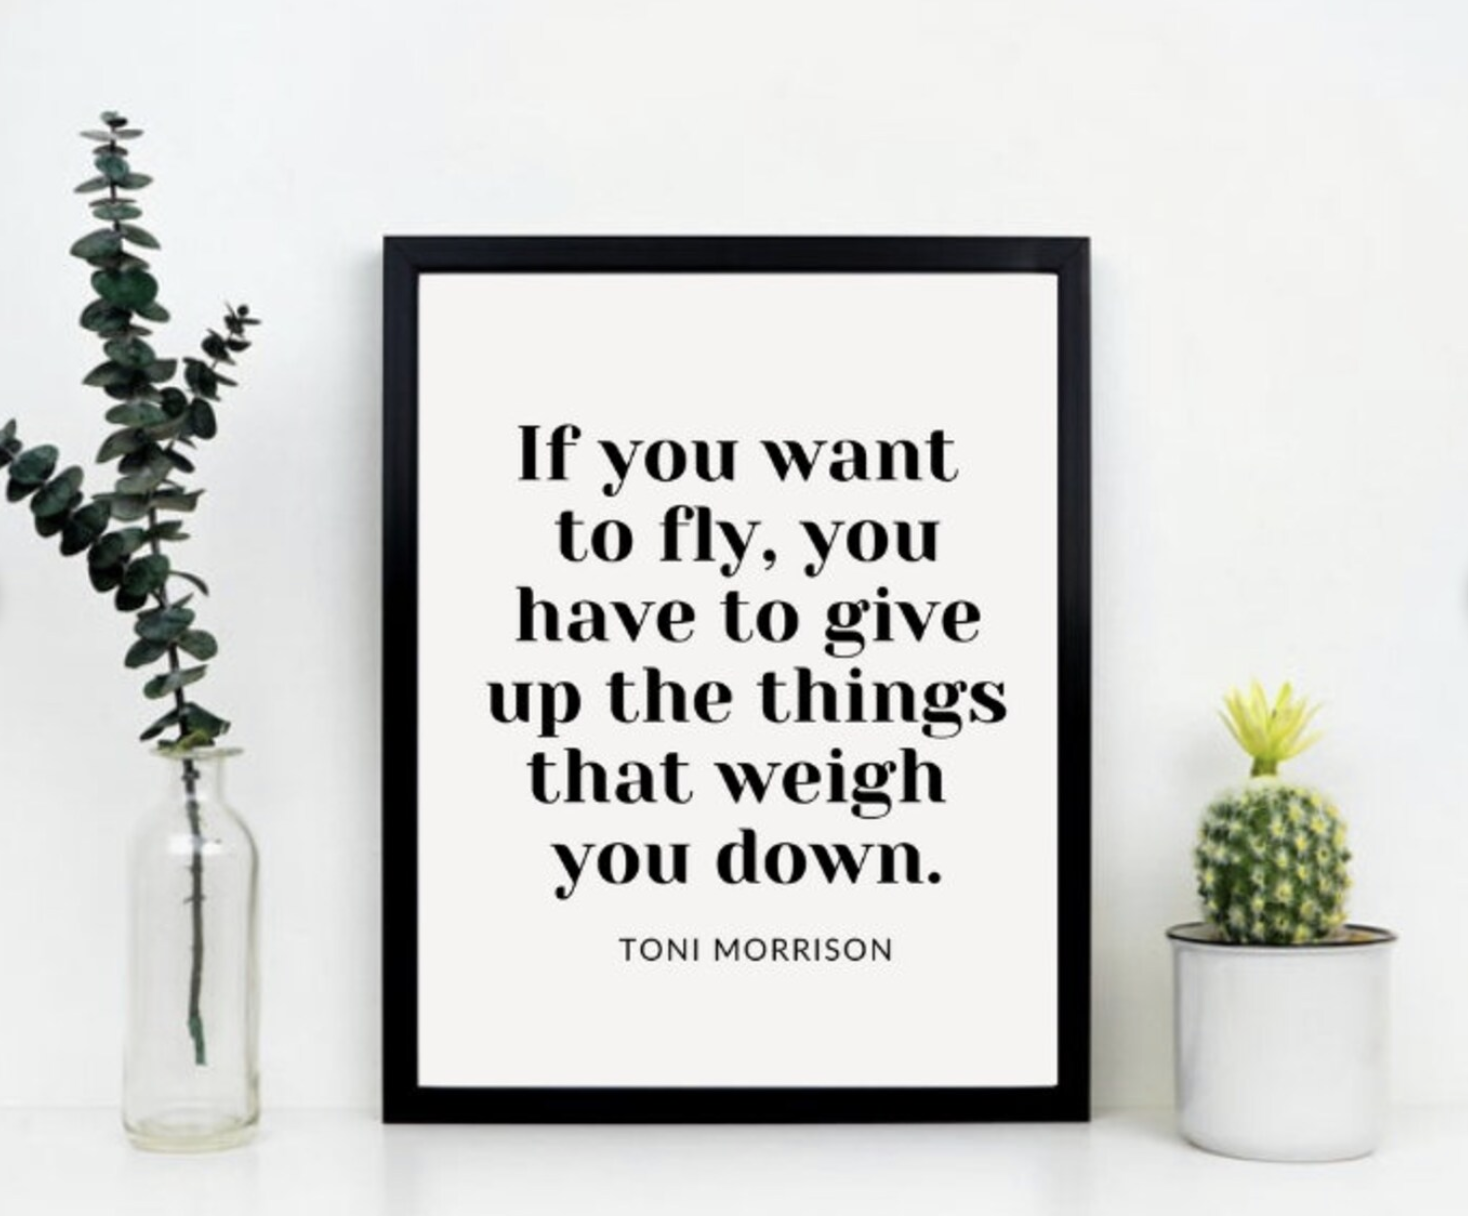 A print featuring a quote by Toni Morrison that says: "If you want to fly, you have to give up the things that weigh you down." 